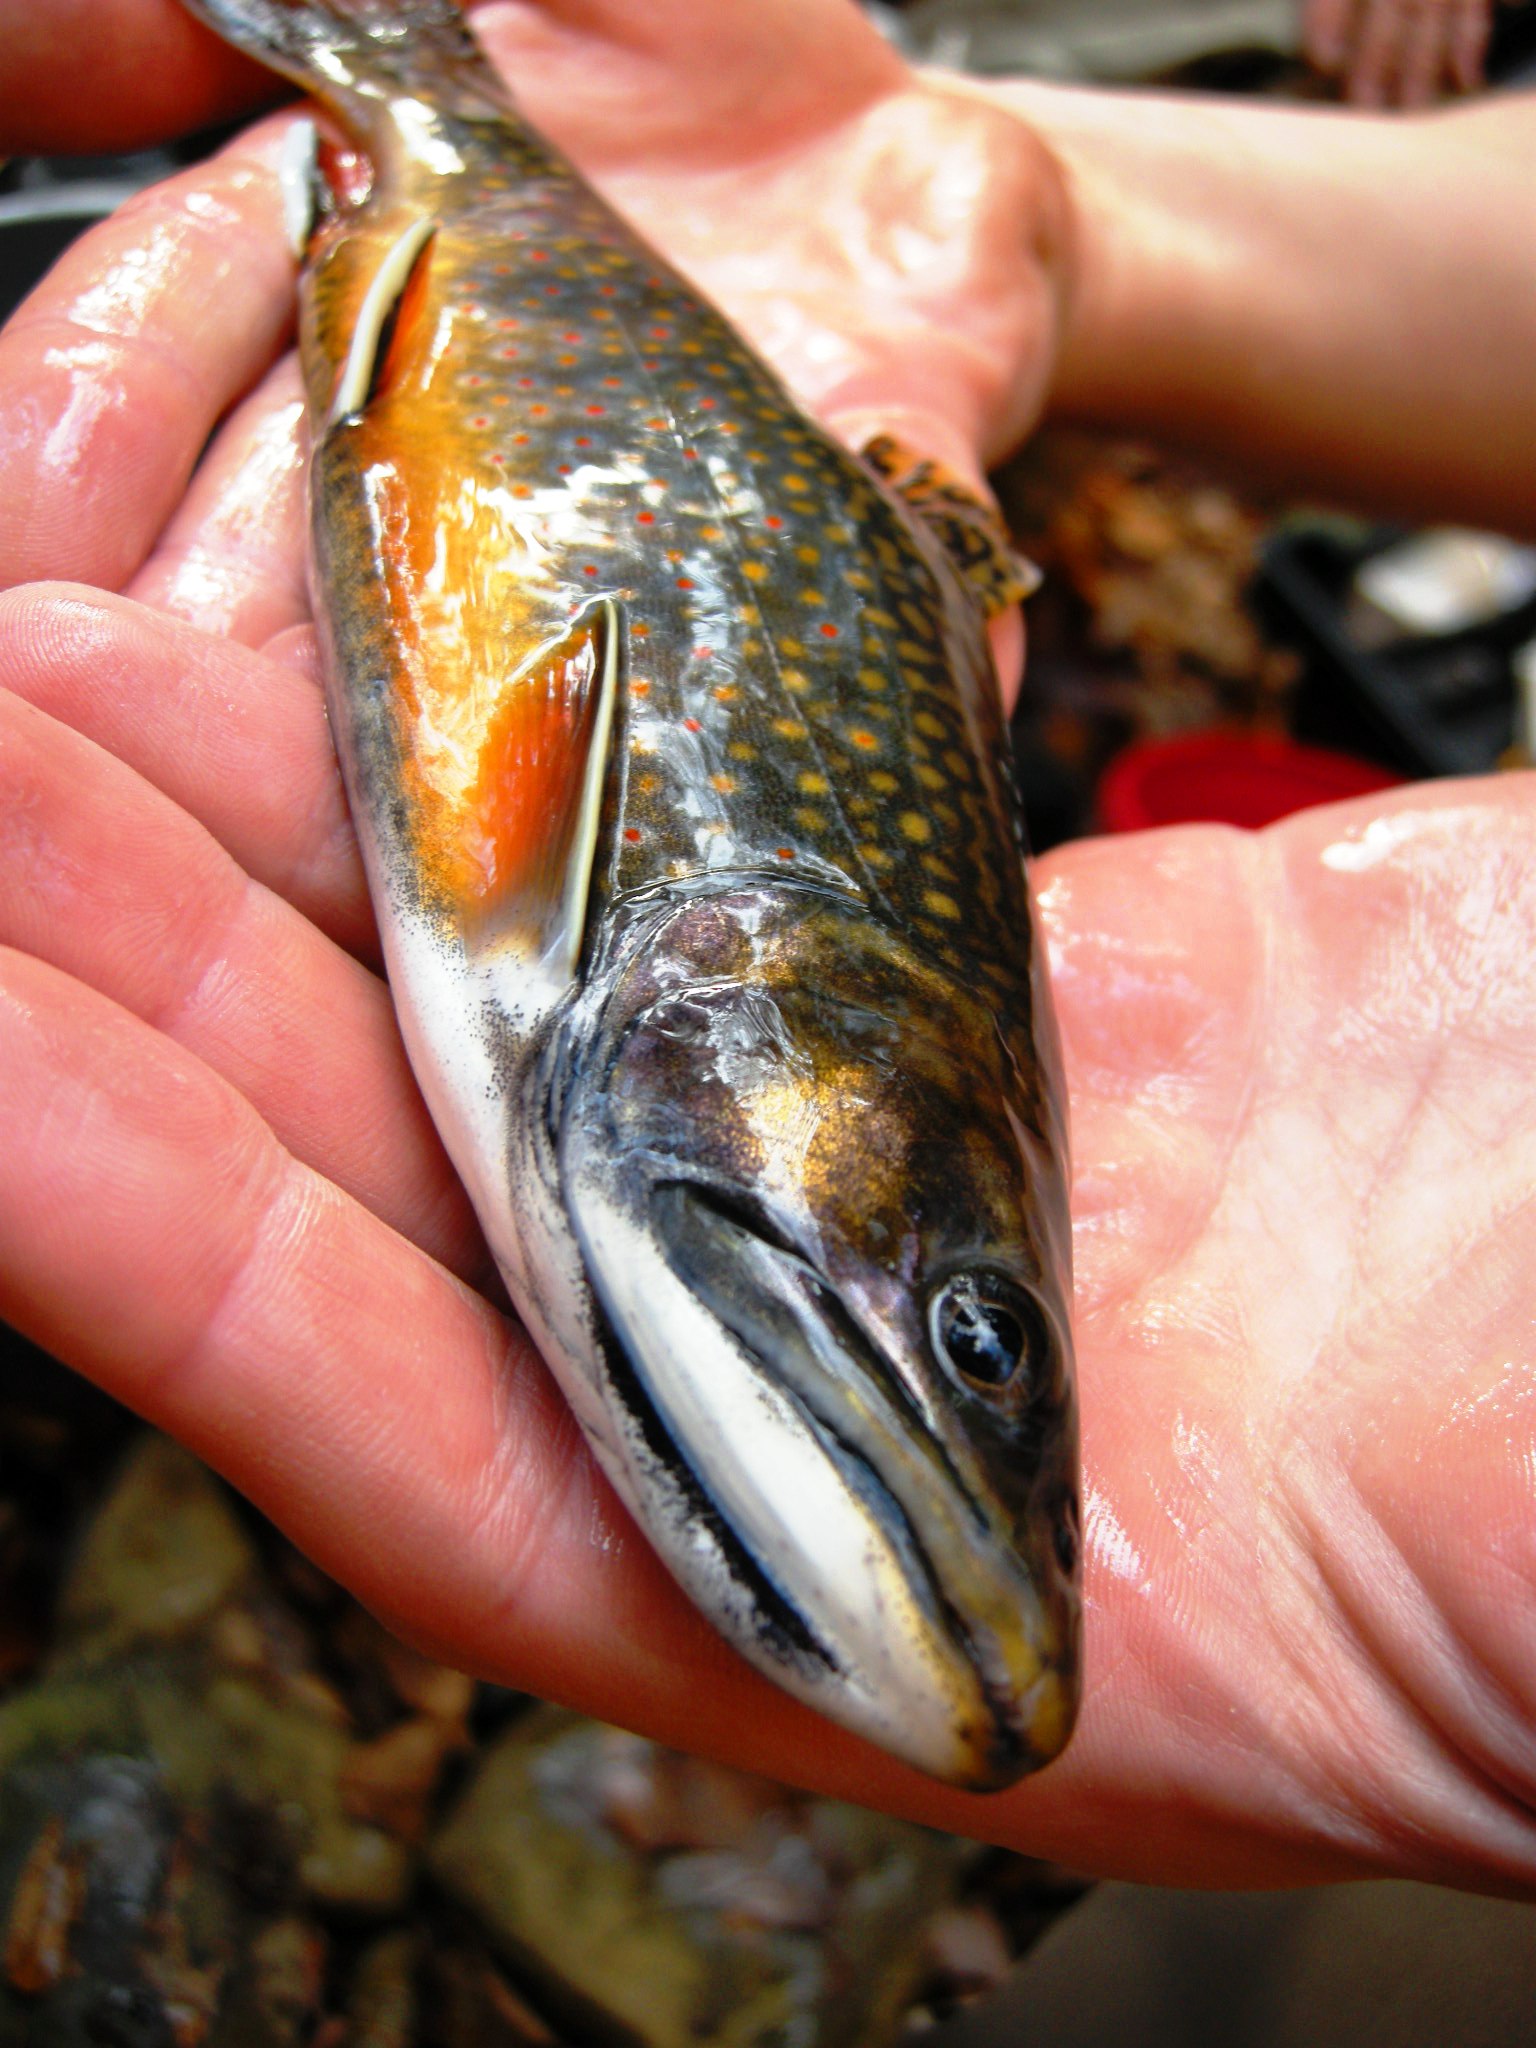 Eastern brook trout